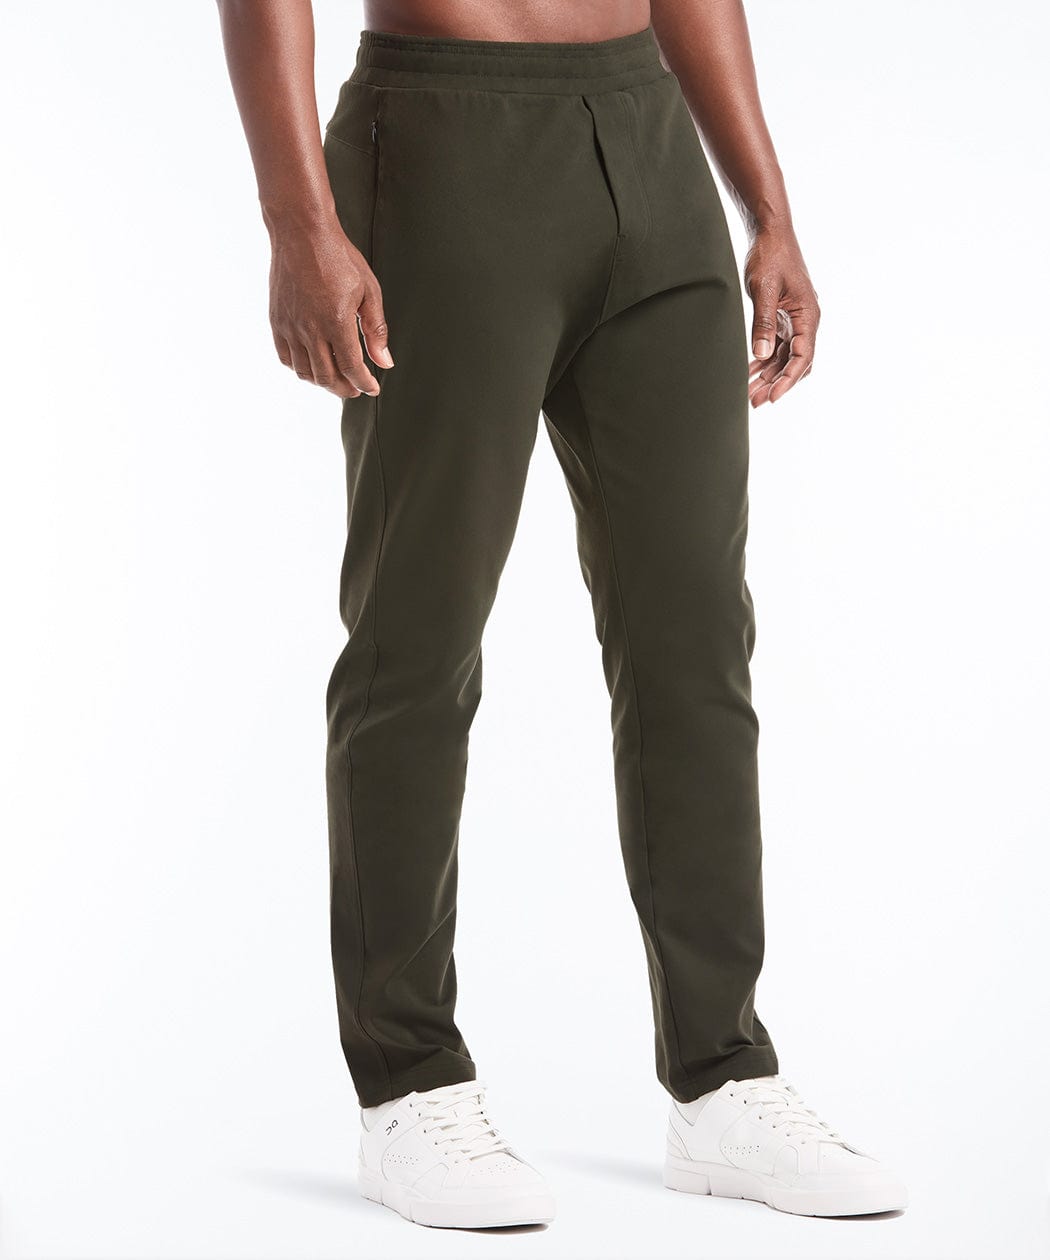 Men's Utility Tapered Jogger Pants - All In Motion™ Olive Green XXL